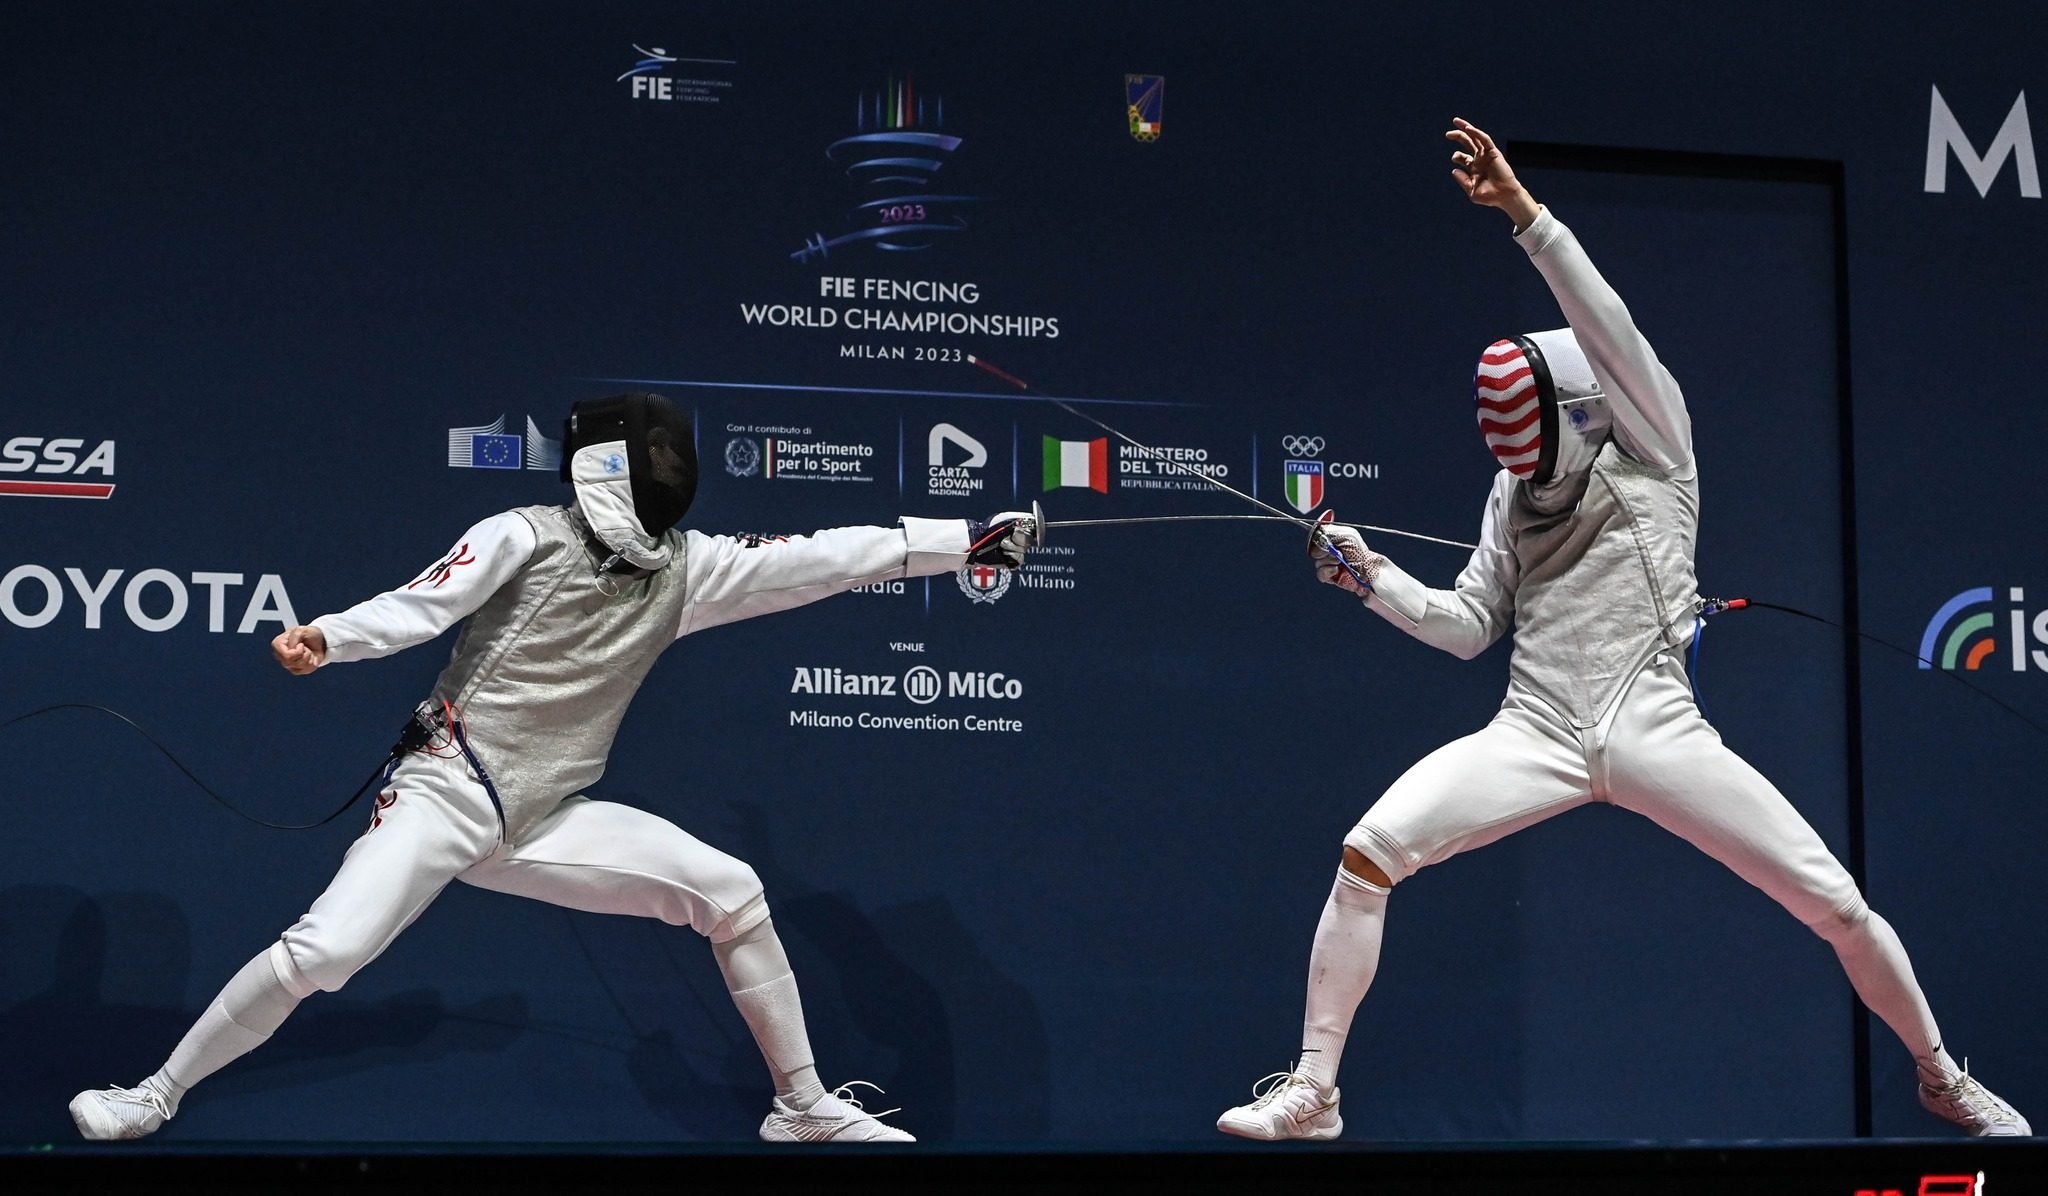 Ryan Choi Chun-yin (left) takes on American opponent in the bronze medal match in Milan. Photo: Handout